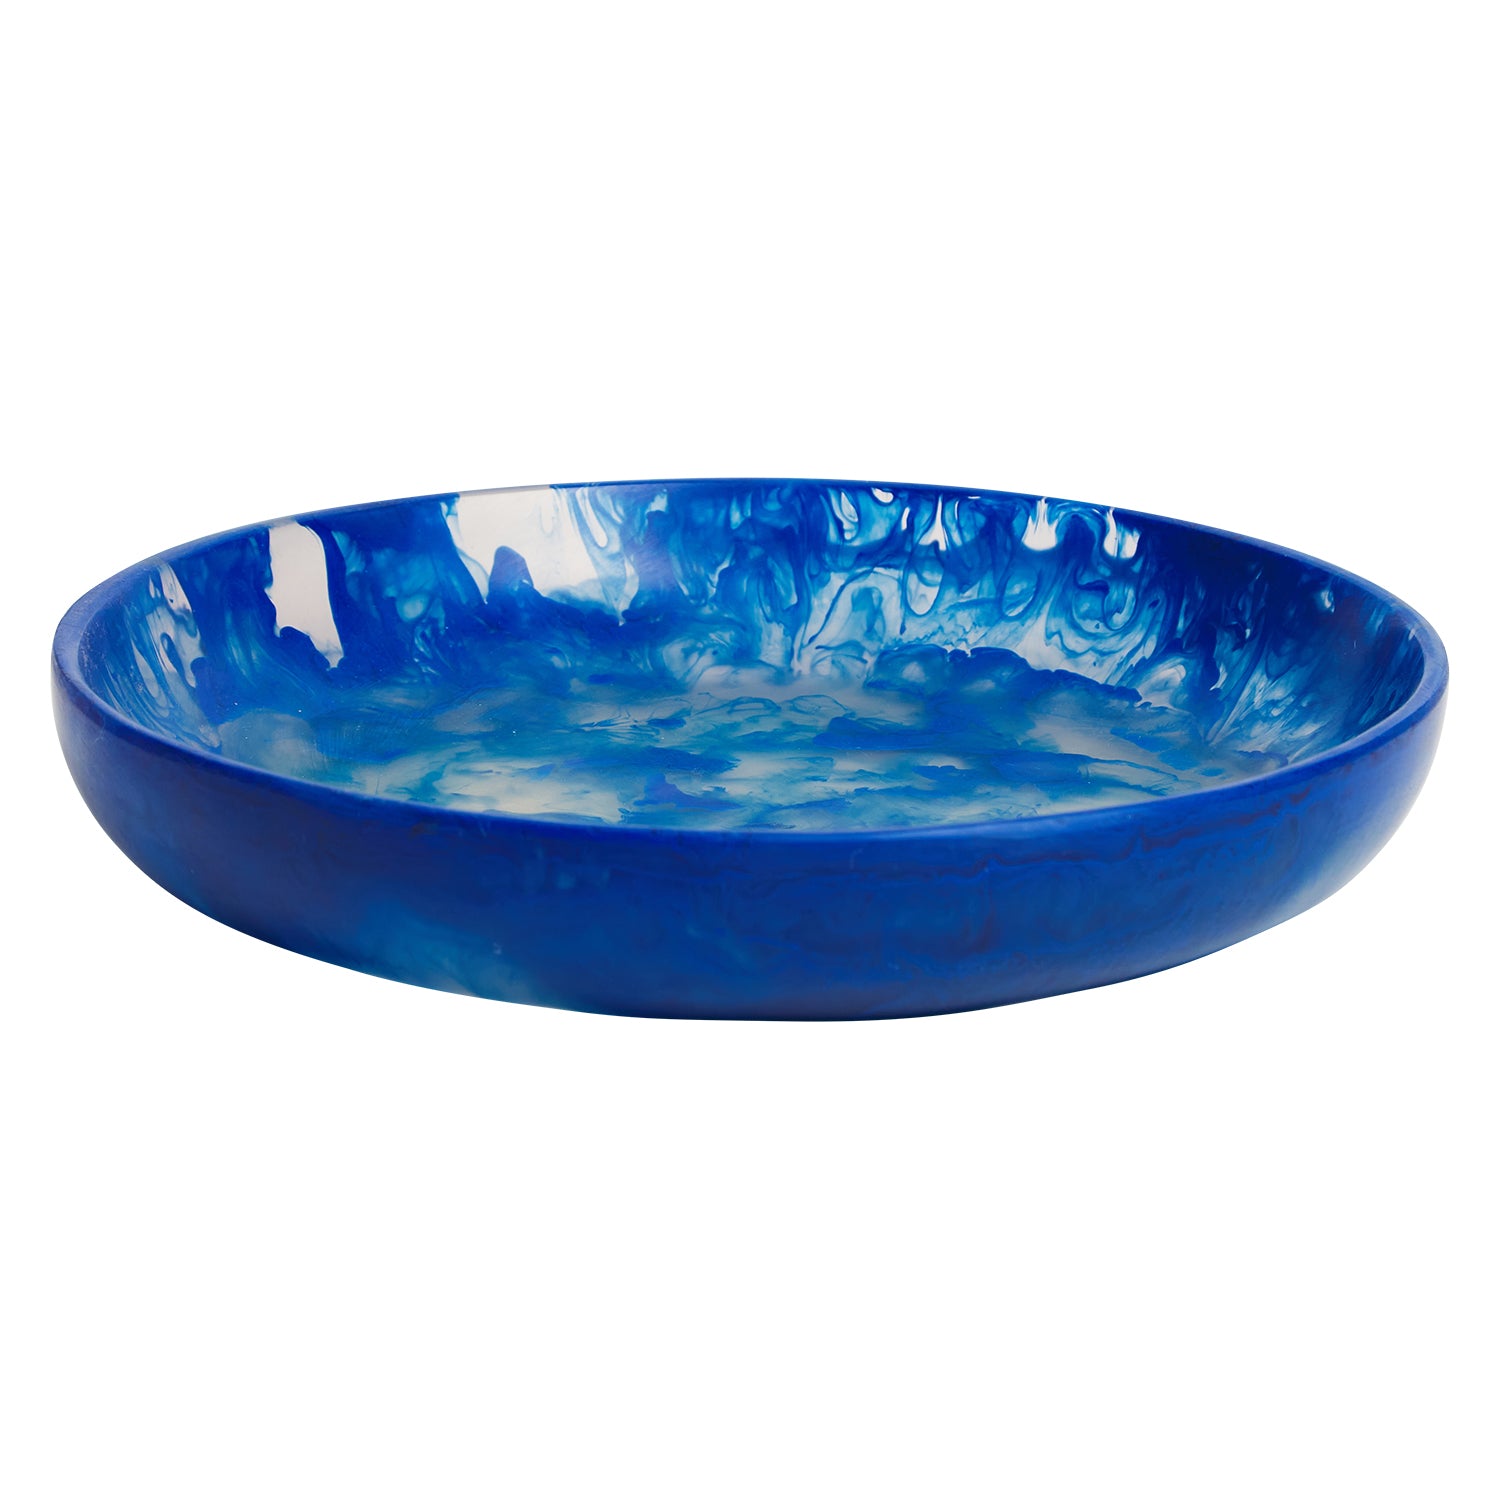 Medina Platter by Sage & Clare in Lapis colour - vibrant blue